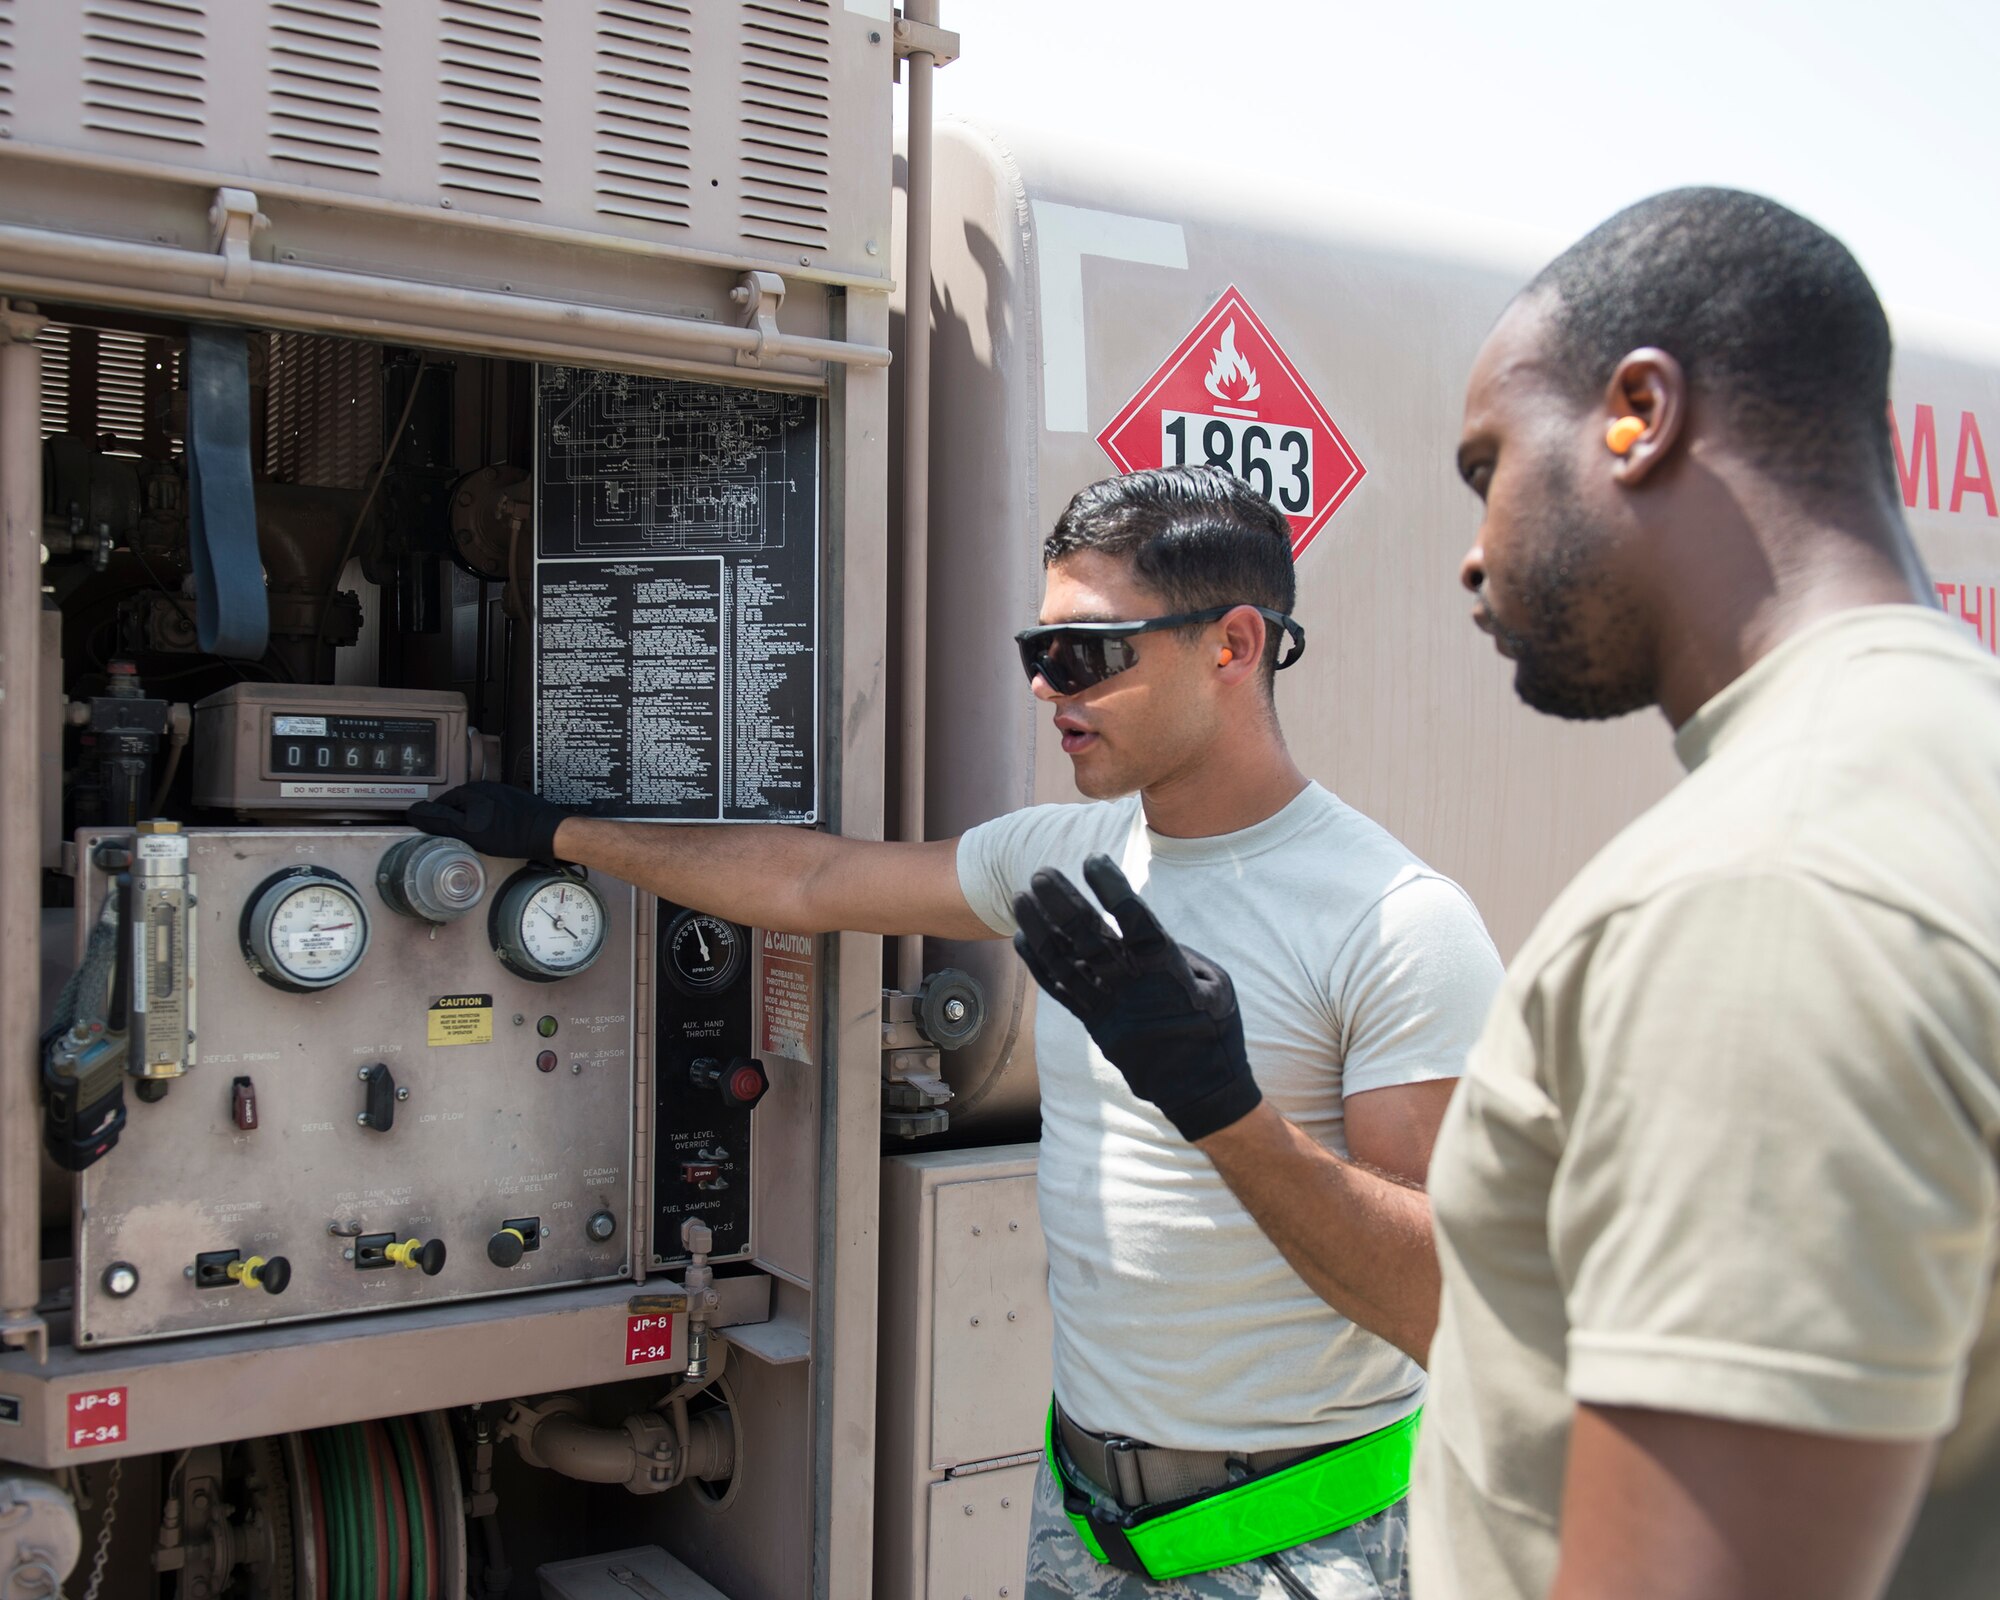 U.S. Air Force Senior Airman Yahya Elgazar, left, fuels distribution technician with the 379th Expeditionary Logistics Readiness Squadron, Fuels Management Flight, talks about the importance of the gas meter to U.S. Army Spc. Anthony Jackson Jr., petroleum oils and lubricants specialist with the Headquarters and Headquarters Battalion 2-43 Air Defense Artillery, at Al Udeid Air Base, Qatar, Sept. 14, 2017.